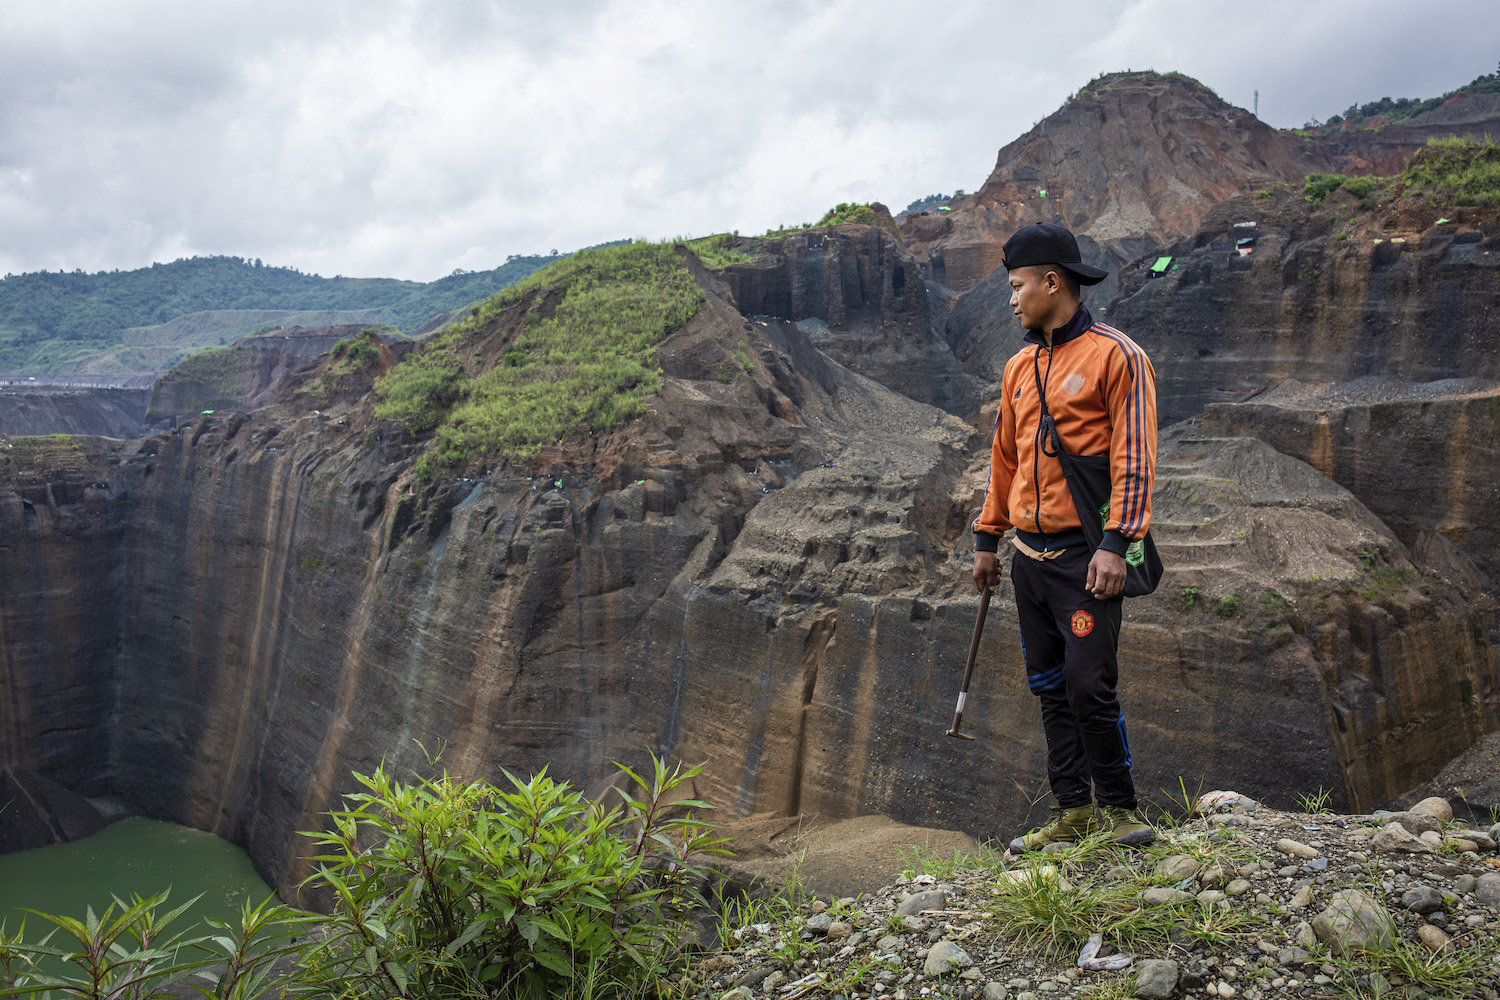 Gum Jat, 31, looks over a jade mining site in Hpakant, Kachin State, where he has worked as a freelance miner for eight years. (Hkun Lat | Frontier)